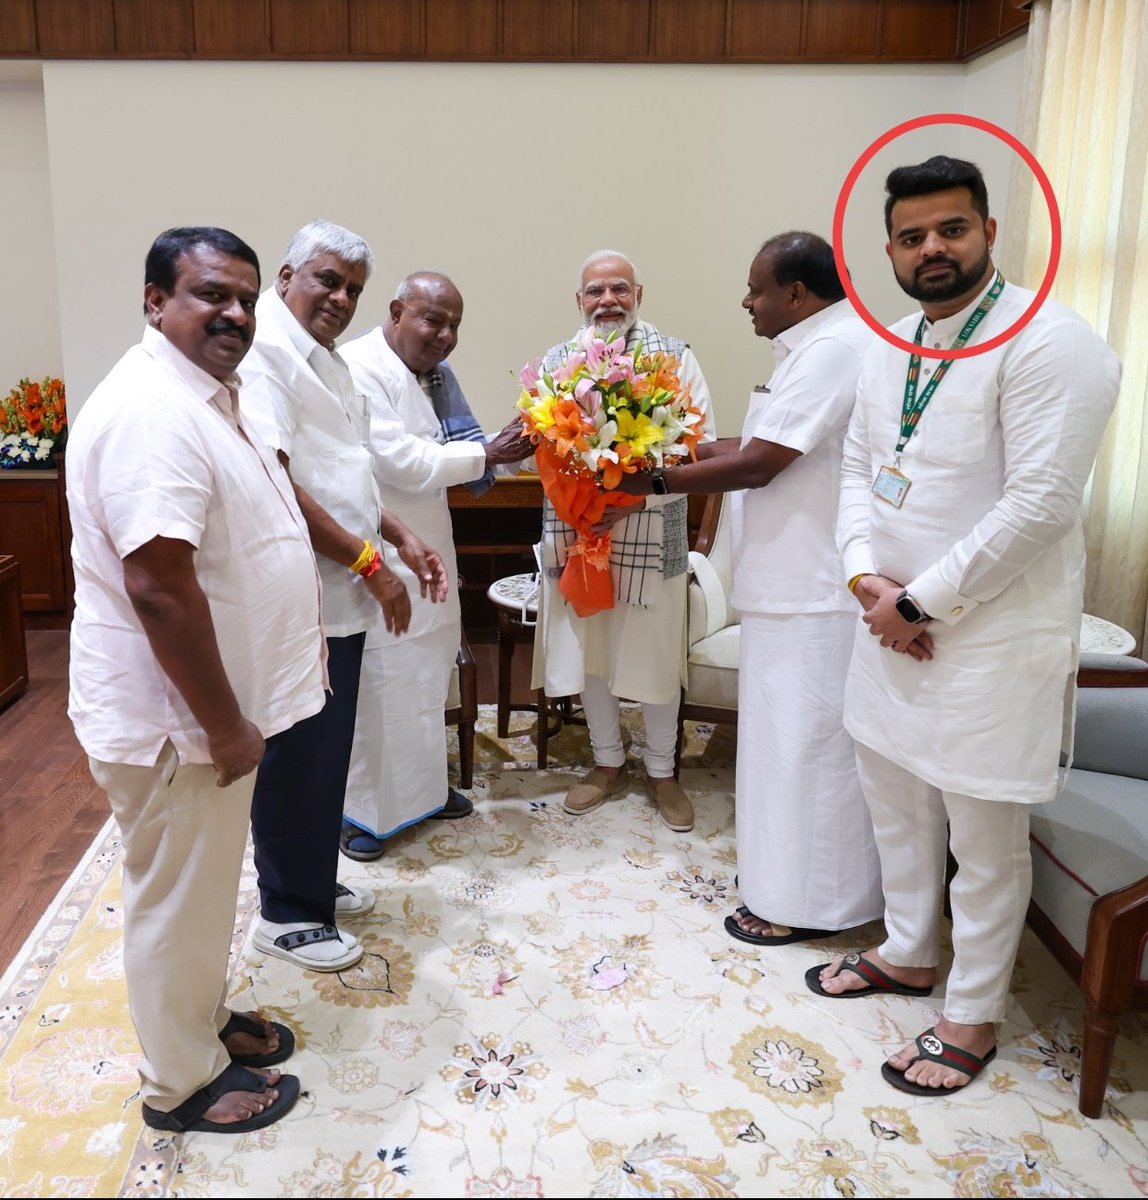 BJP JDS Alliance Candidate Hassan MP Prajwal Revanna has broken all records of atrocities against women. The BJP JDS was aware of this predator, why did they still give him a ticket? #BetiBachaoFromBJP #ಮಹಿಳಾ_ಪೀಡಕ_ಬಿಜೆಪಿ